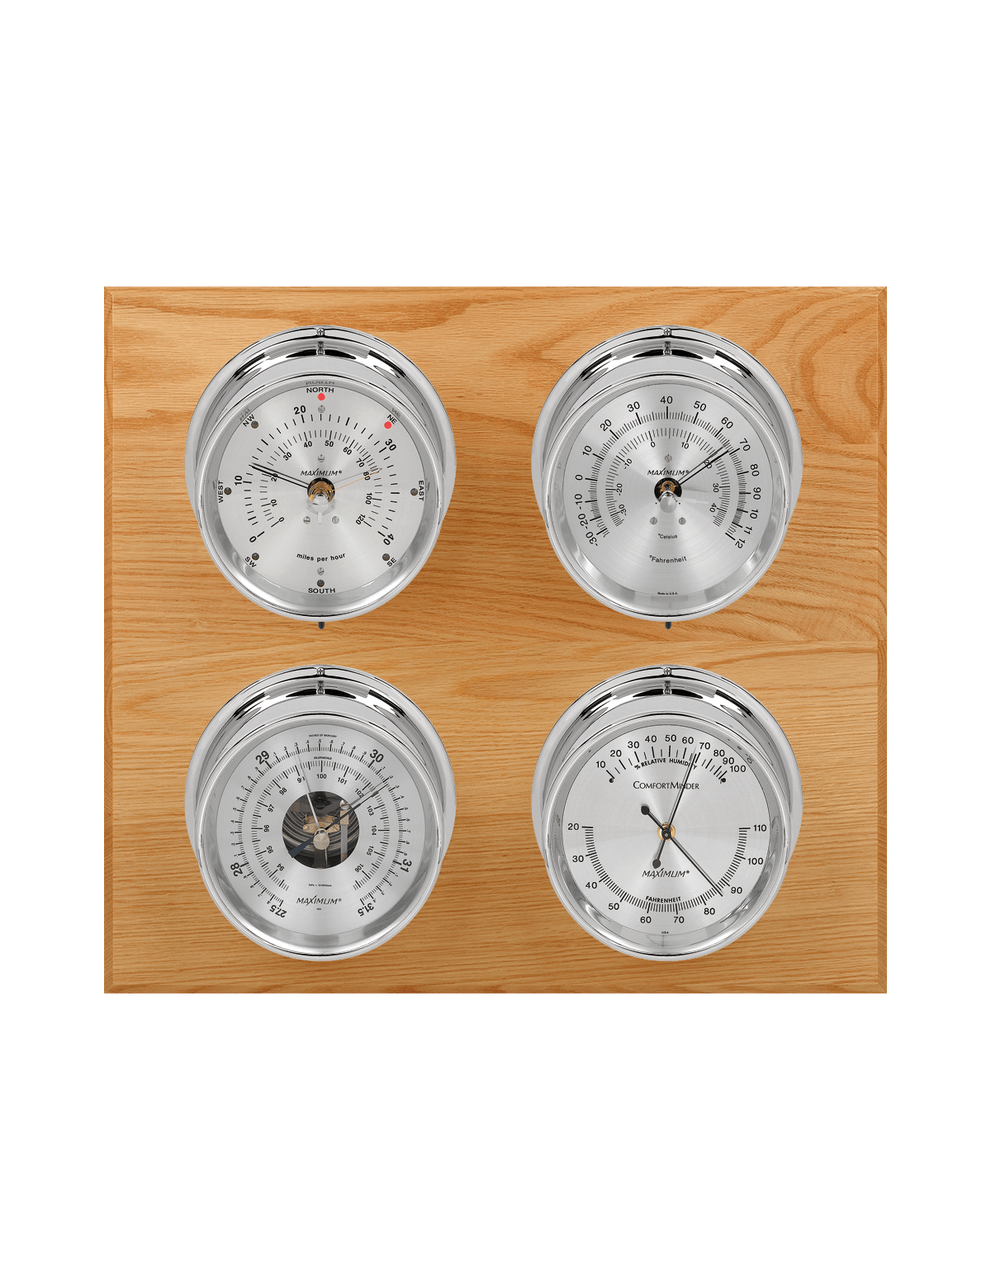 Observer Wind, Thermometer, Barometer, and Humidity Weather Station - 4 Instruments - Polished Chrome Cases - Oak - Silver Face - 2 Scales -Reads 0-120 mph